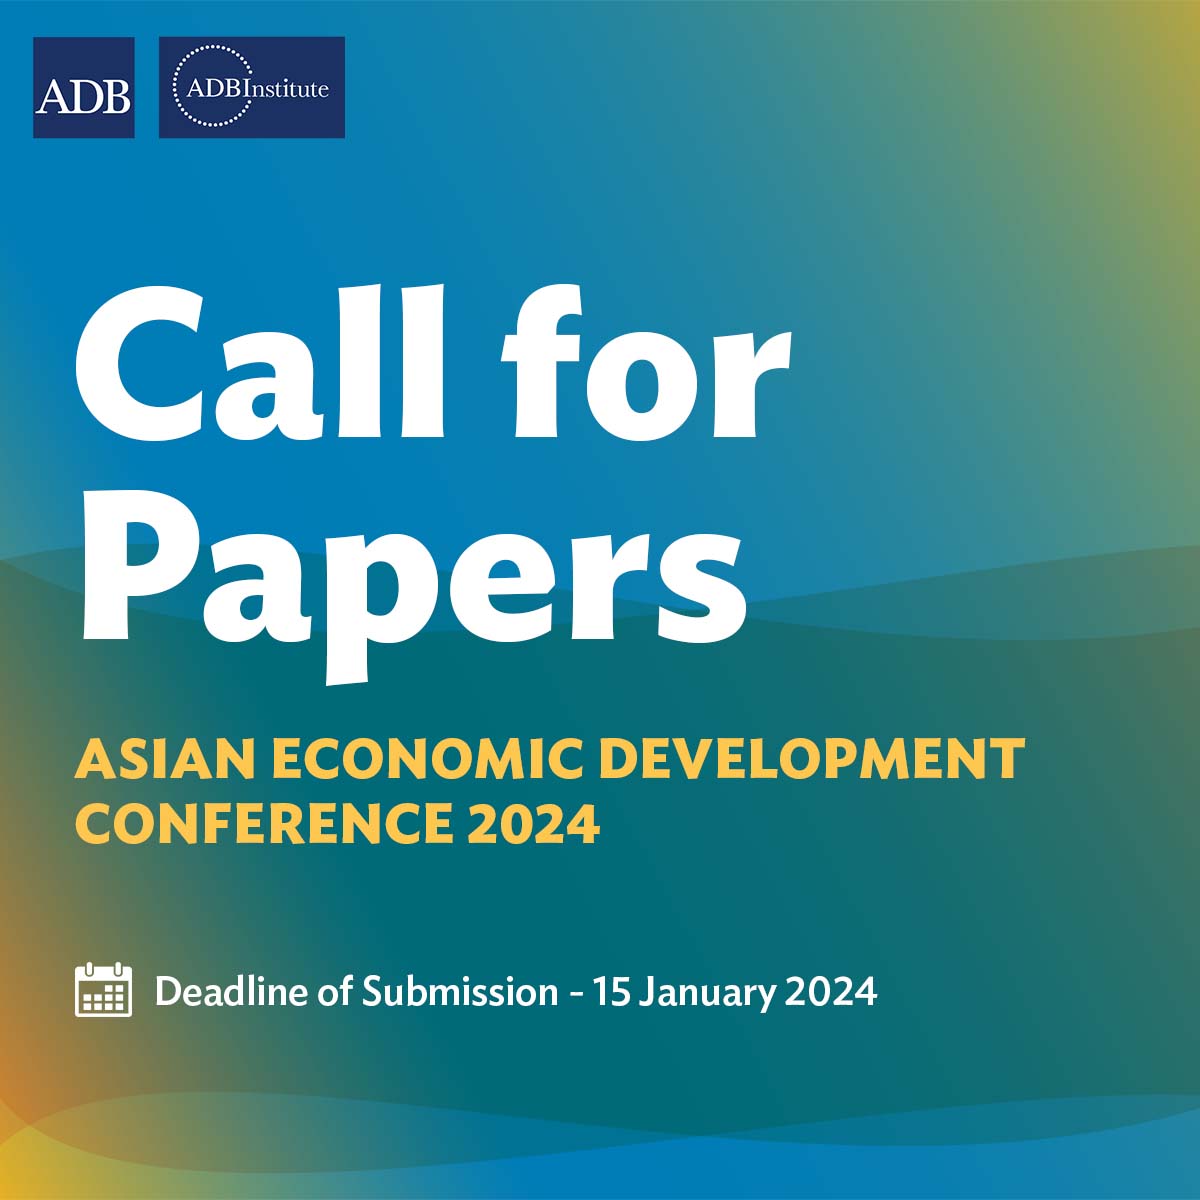 Our 3rd Asian Economic Development Conference will be held 13-14 July 2024 at Seoul National University! 🇰🇷 I invite you to submit your unpublished empirical analyses, survey articles, economic modeling, and policy-oriented research on major economic development issues relevant…